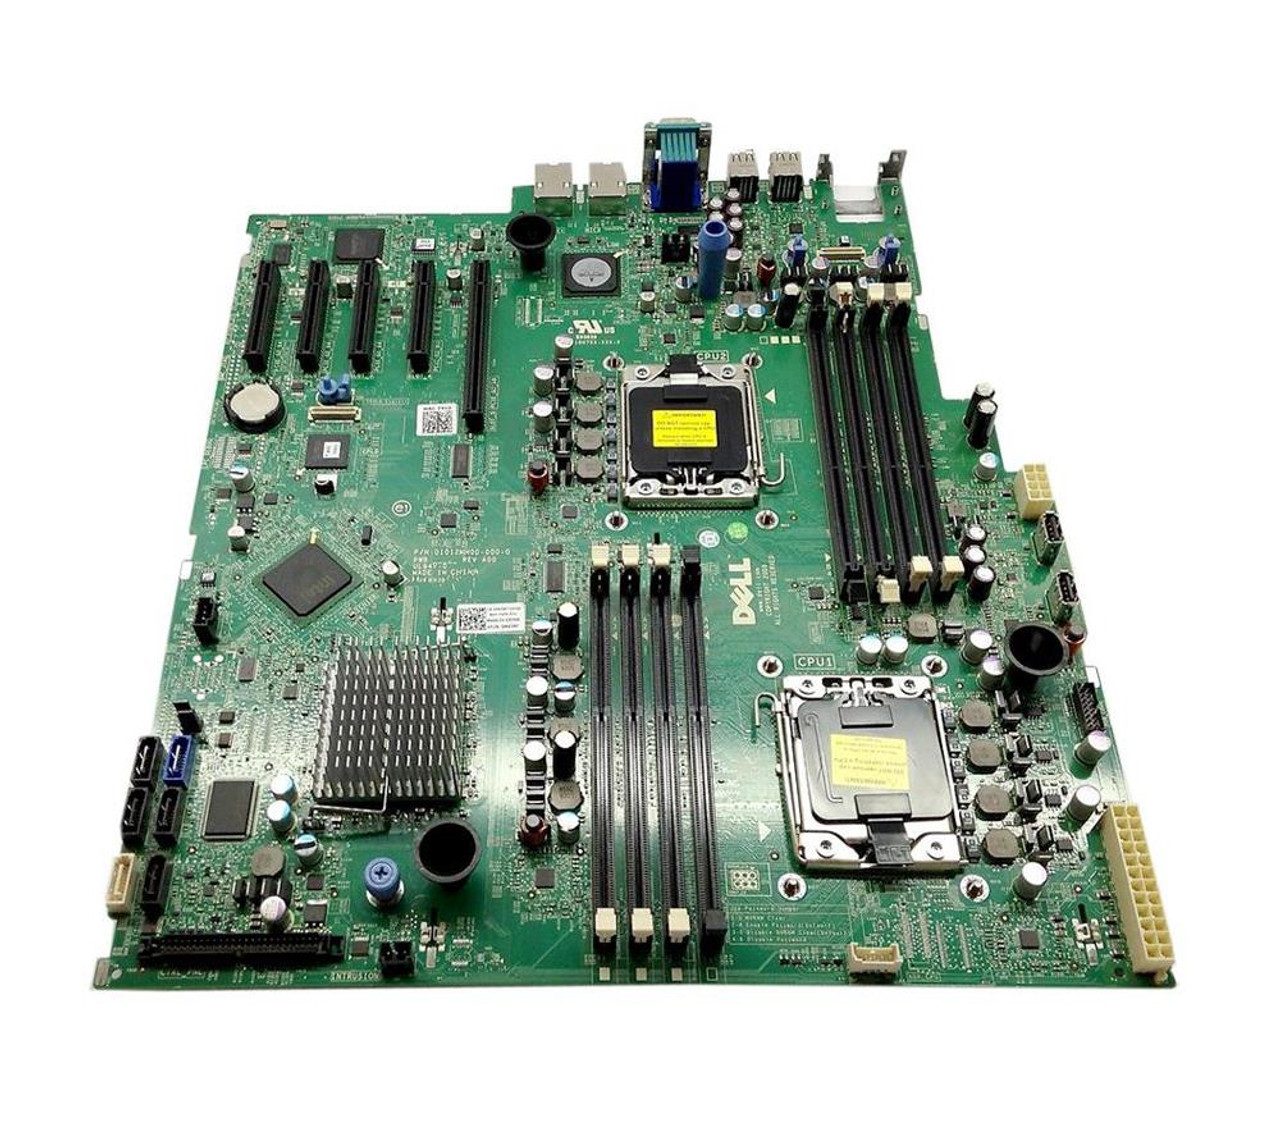 01012MN00-000-G Dell System Board (Motherboard) for PowerEdge T410 Server (Refurbished)